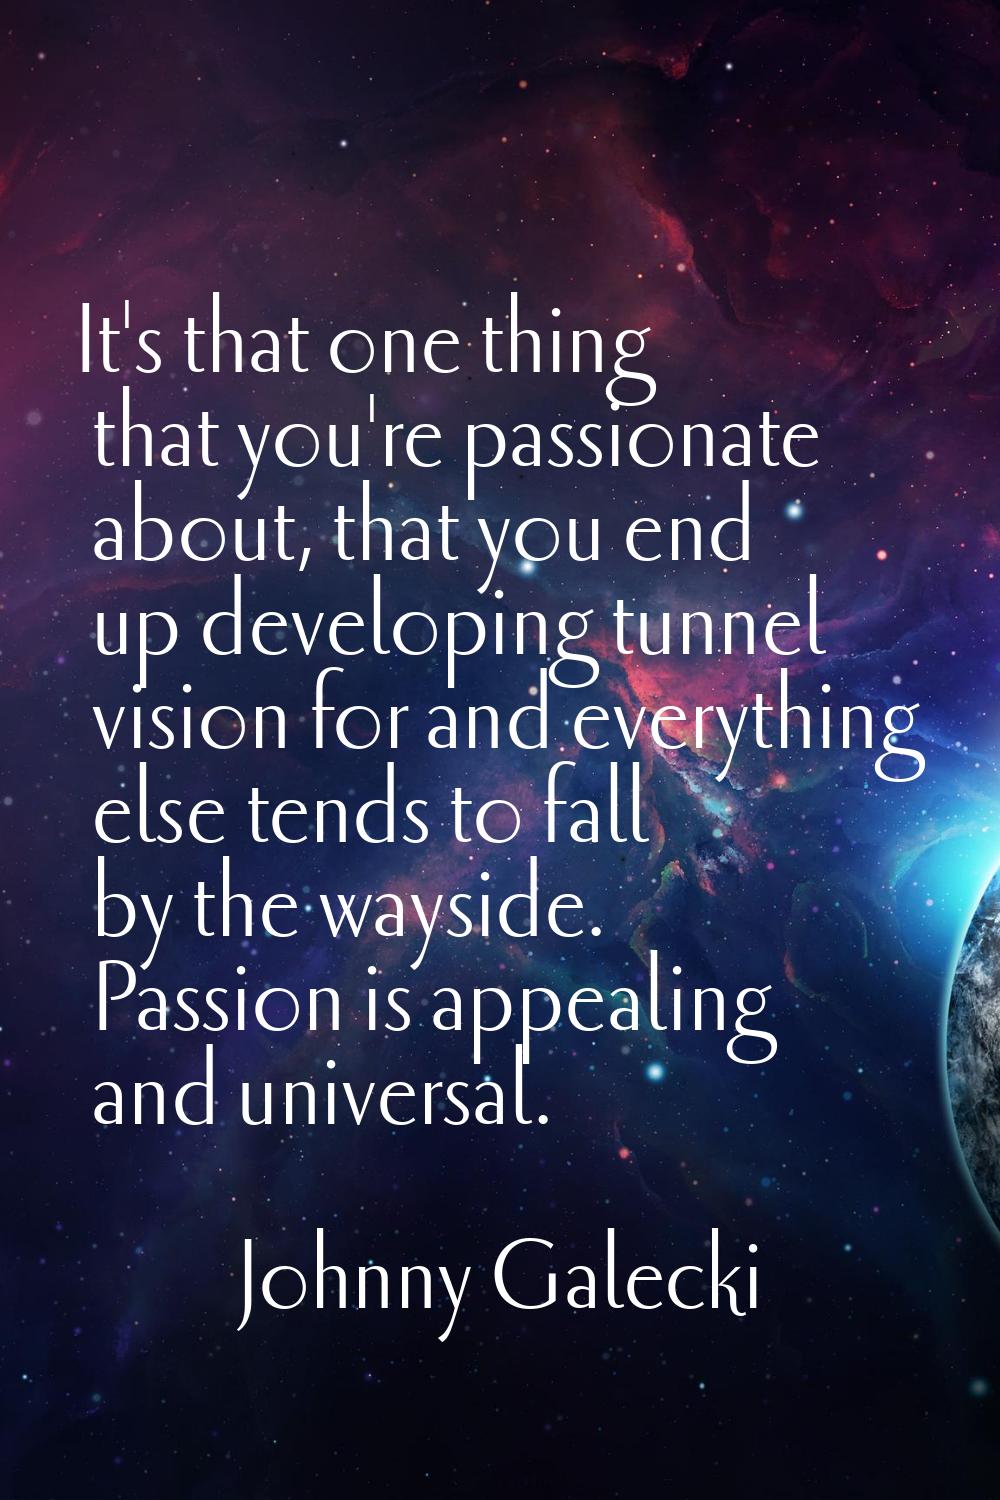 It's that one thing that you're passionate about, that you end up developing tunnel vision for and 